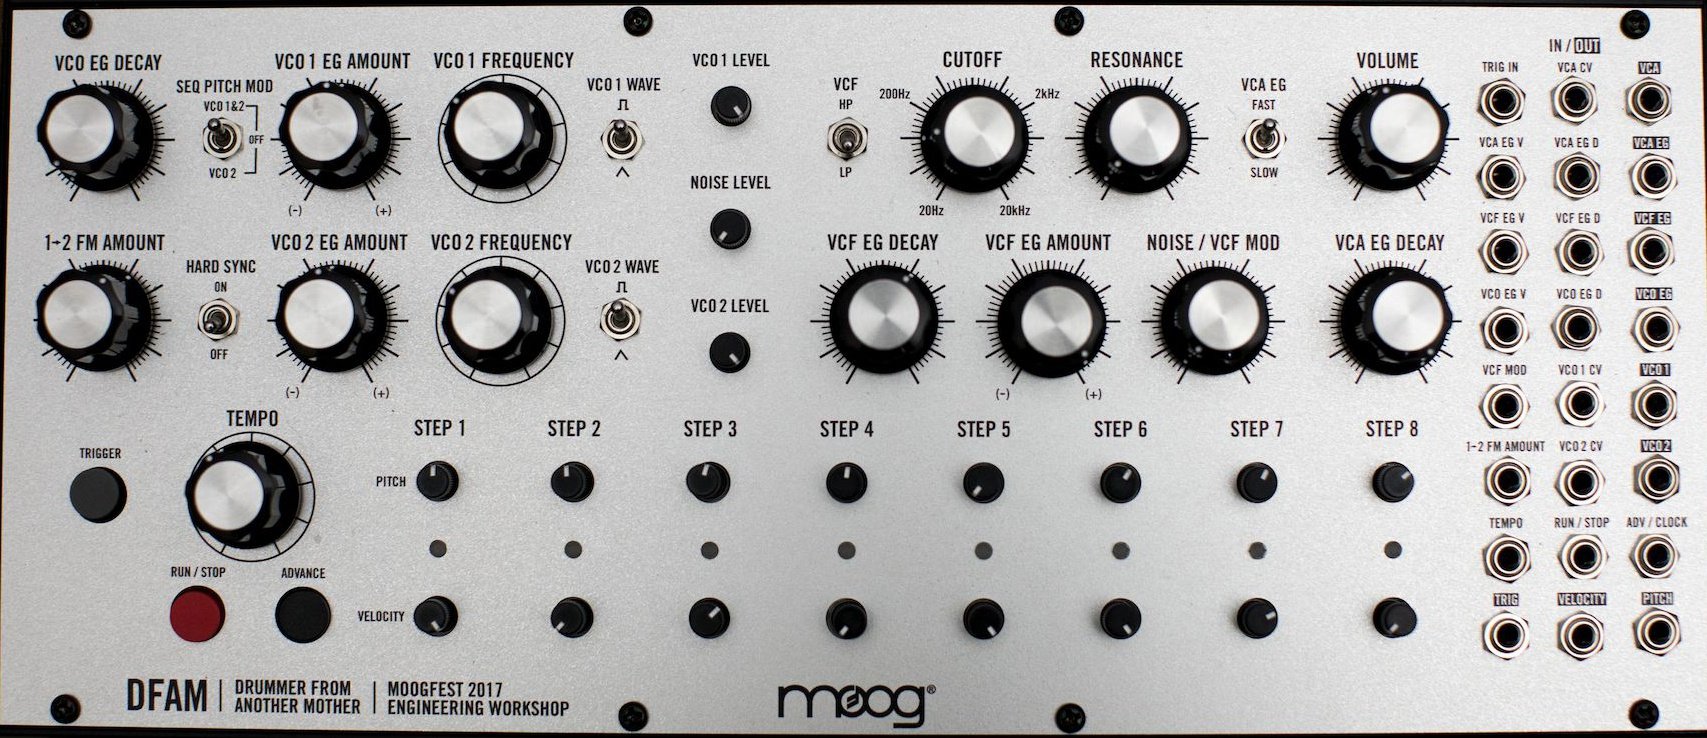 Moog Music Inc. Drummer From Another Mother - Eurorack Module on